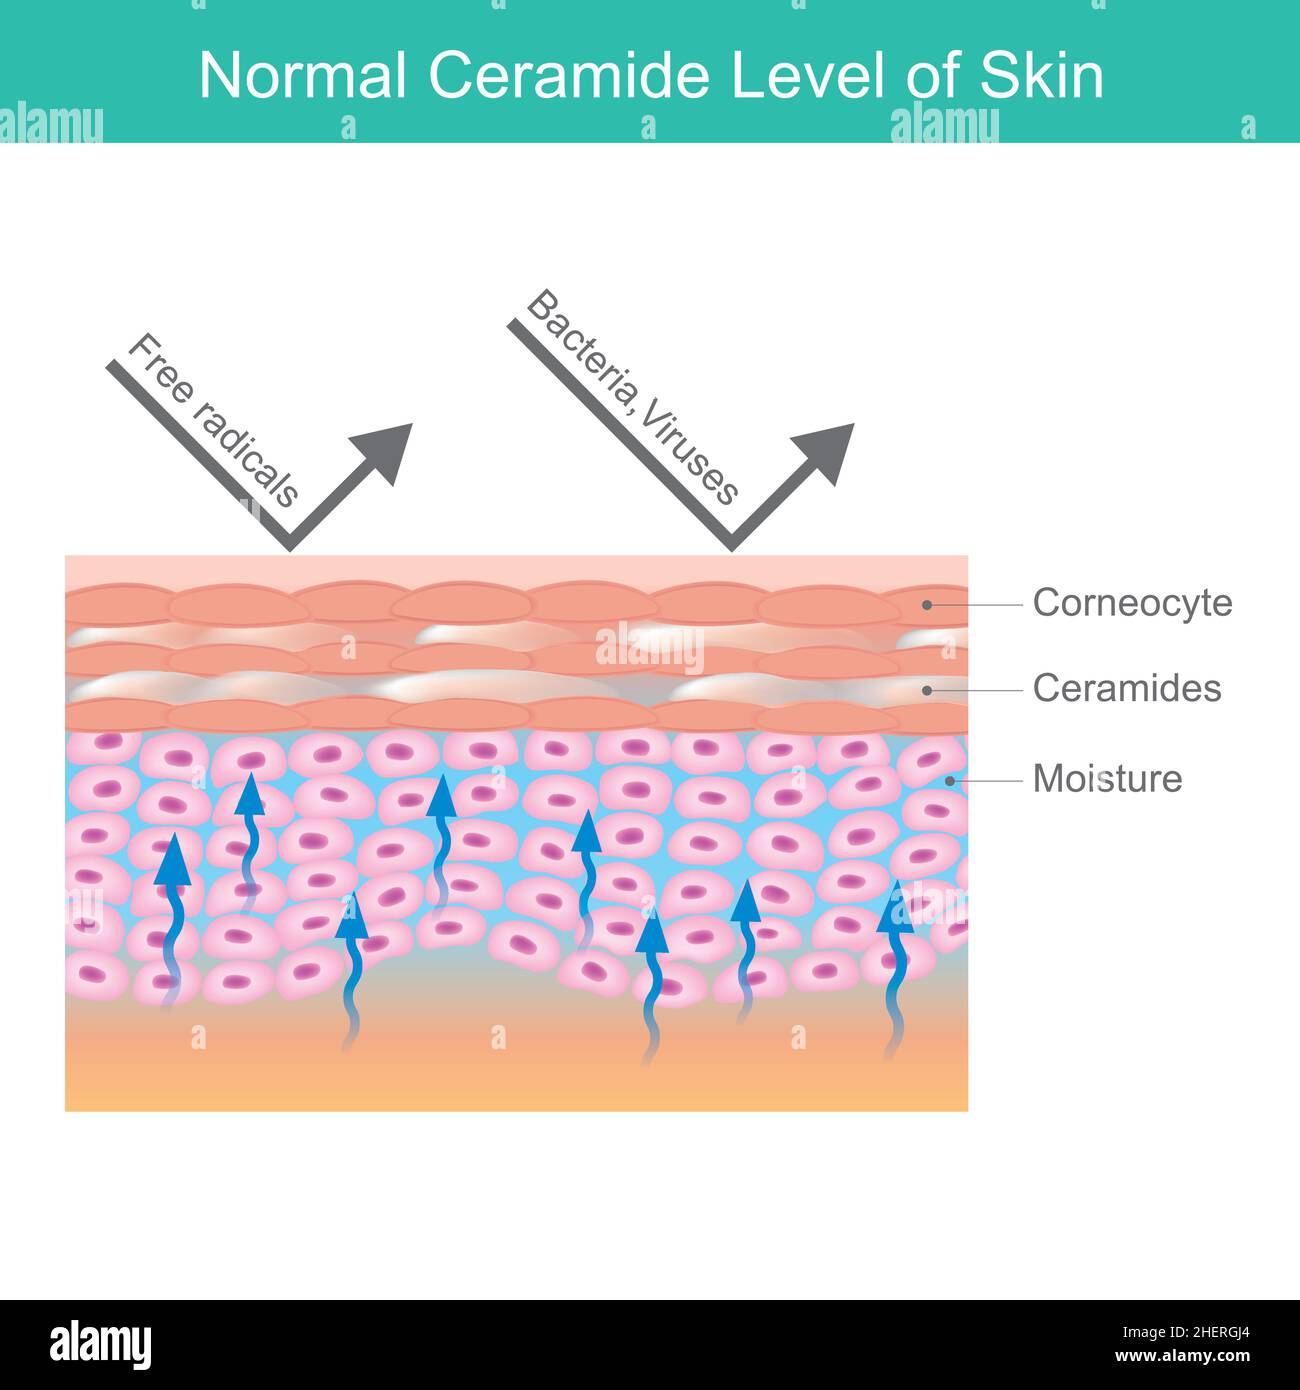 Normal Creamed Level of Skin. Human skin layers illustration Explain glucosylceramide and moisture in skin normal level. Stock Vector